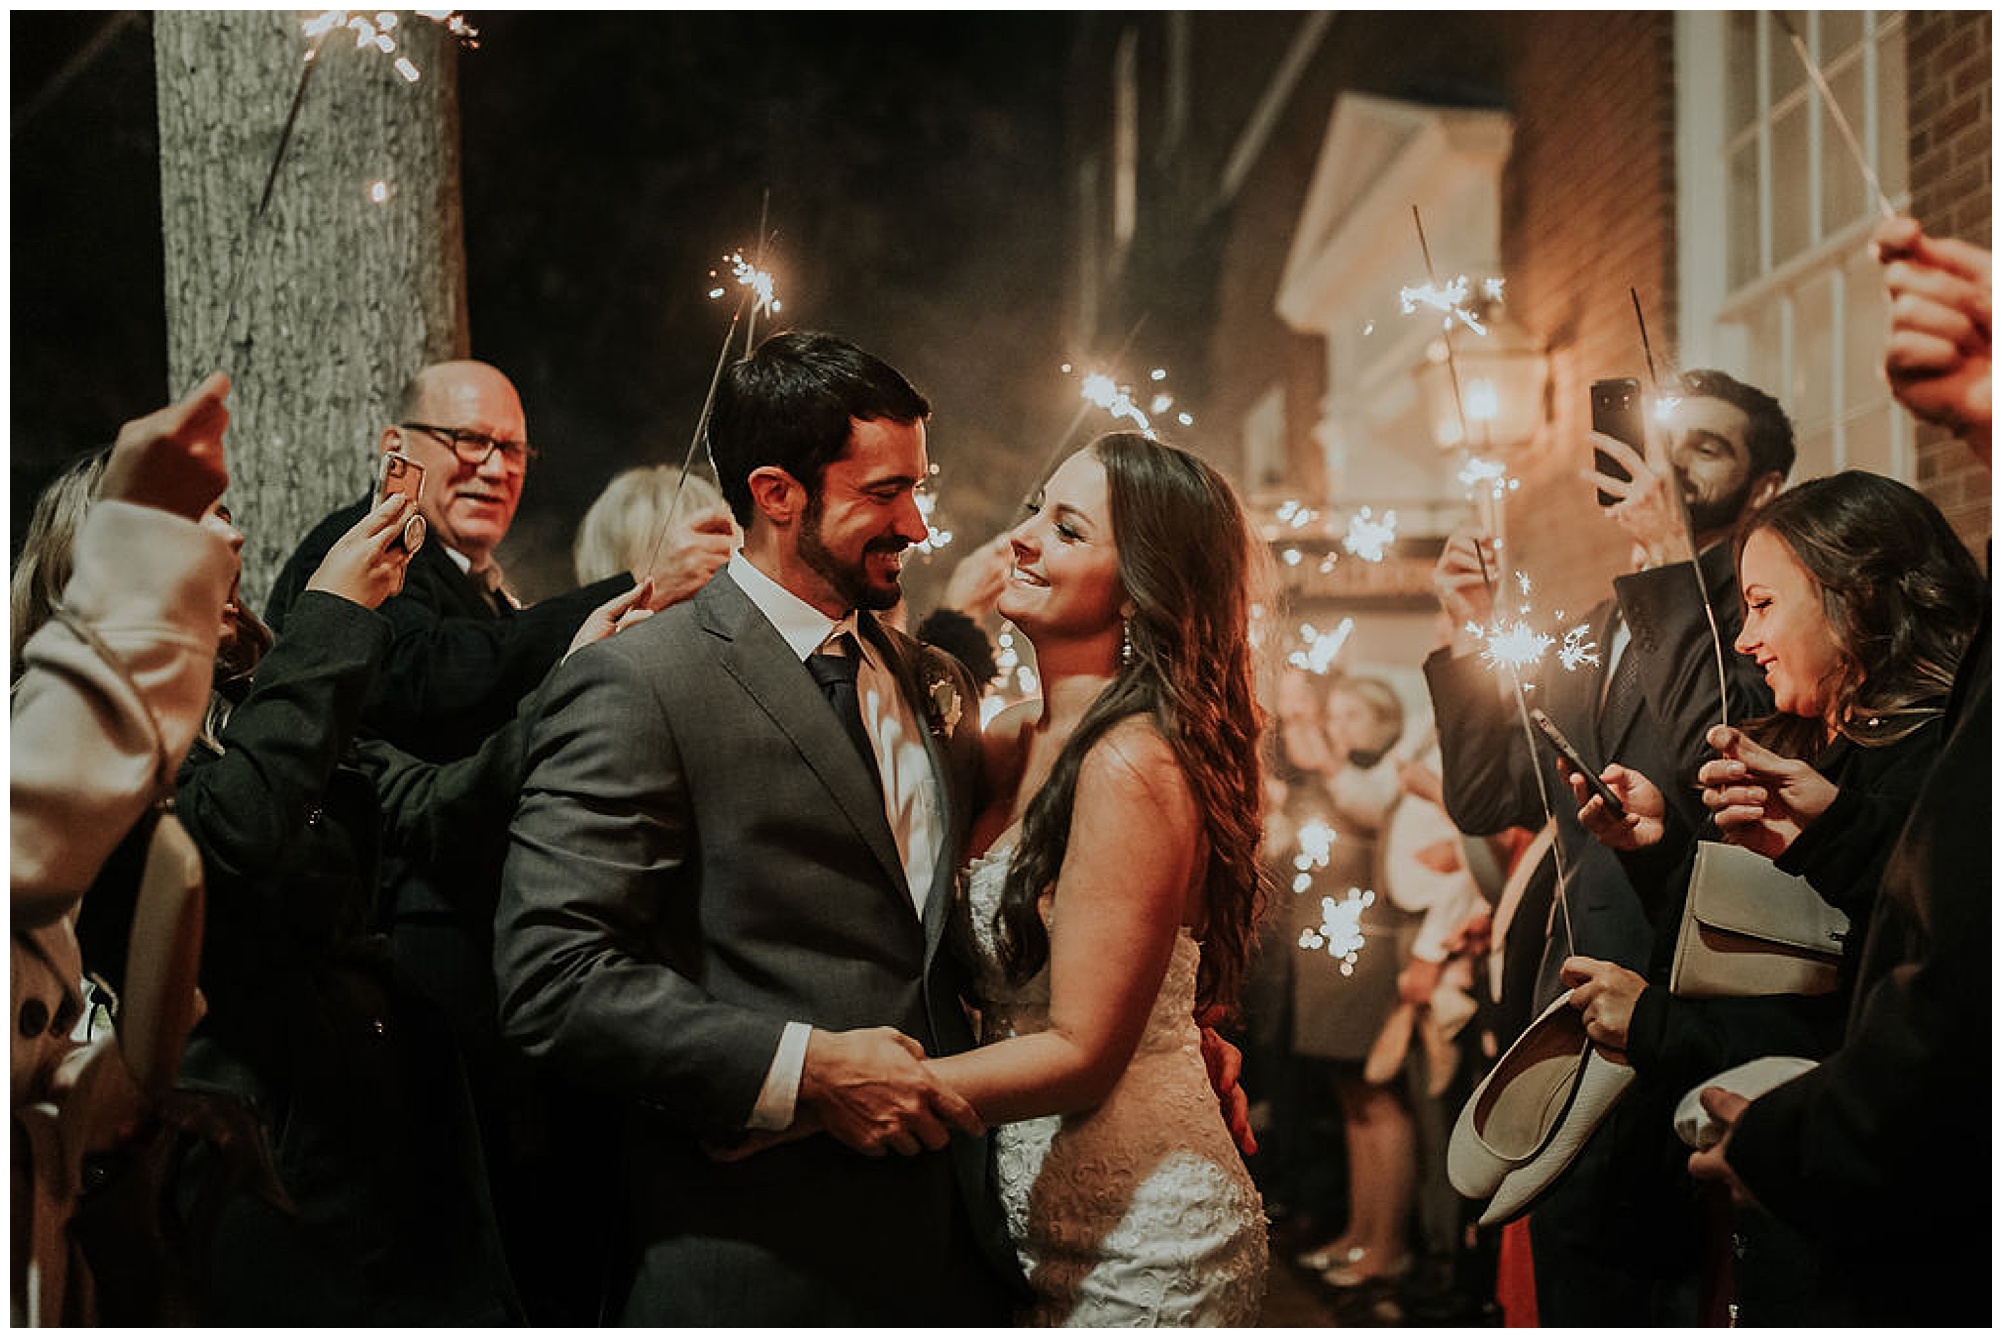 cue the confetti and fireworks for this autumn and fall wedding at the tidewater inn venue in easton maryland now featured on my eastern shore wedding. grand exit with sparklers at historic venue. intimate moody sultry romantic and totally classic.